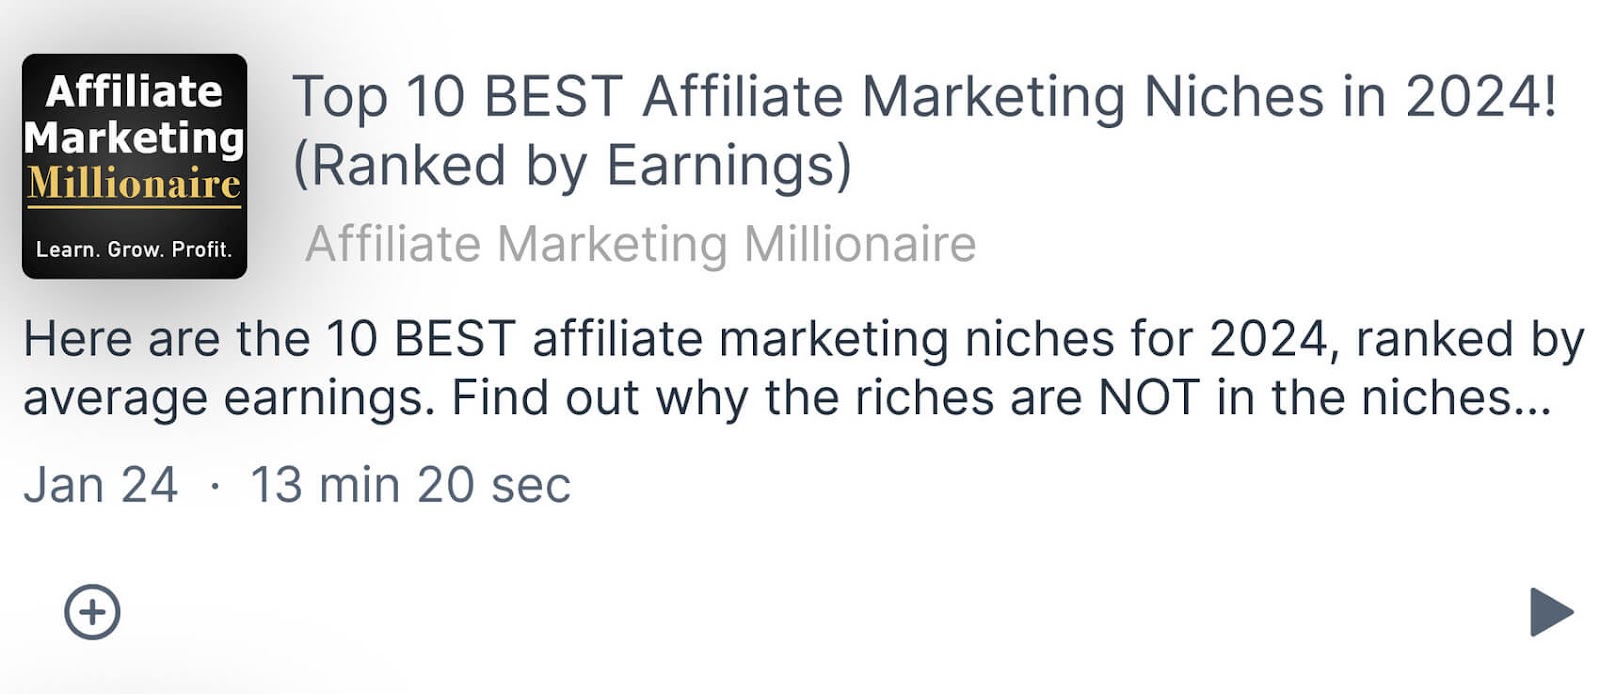 Affiliate Marketing Millionaire's podcast titled "Top 10 Best Affiliate Marketing Niches successful  2024!"